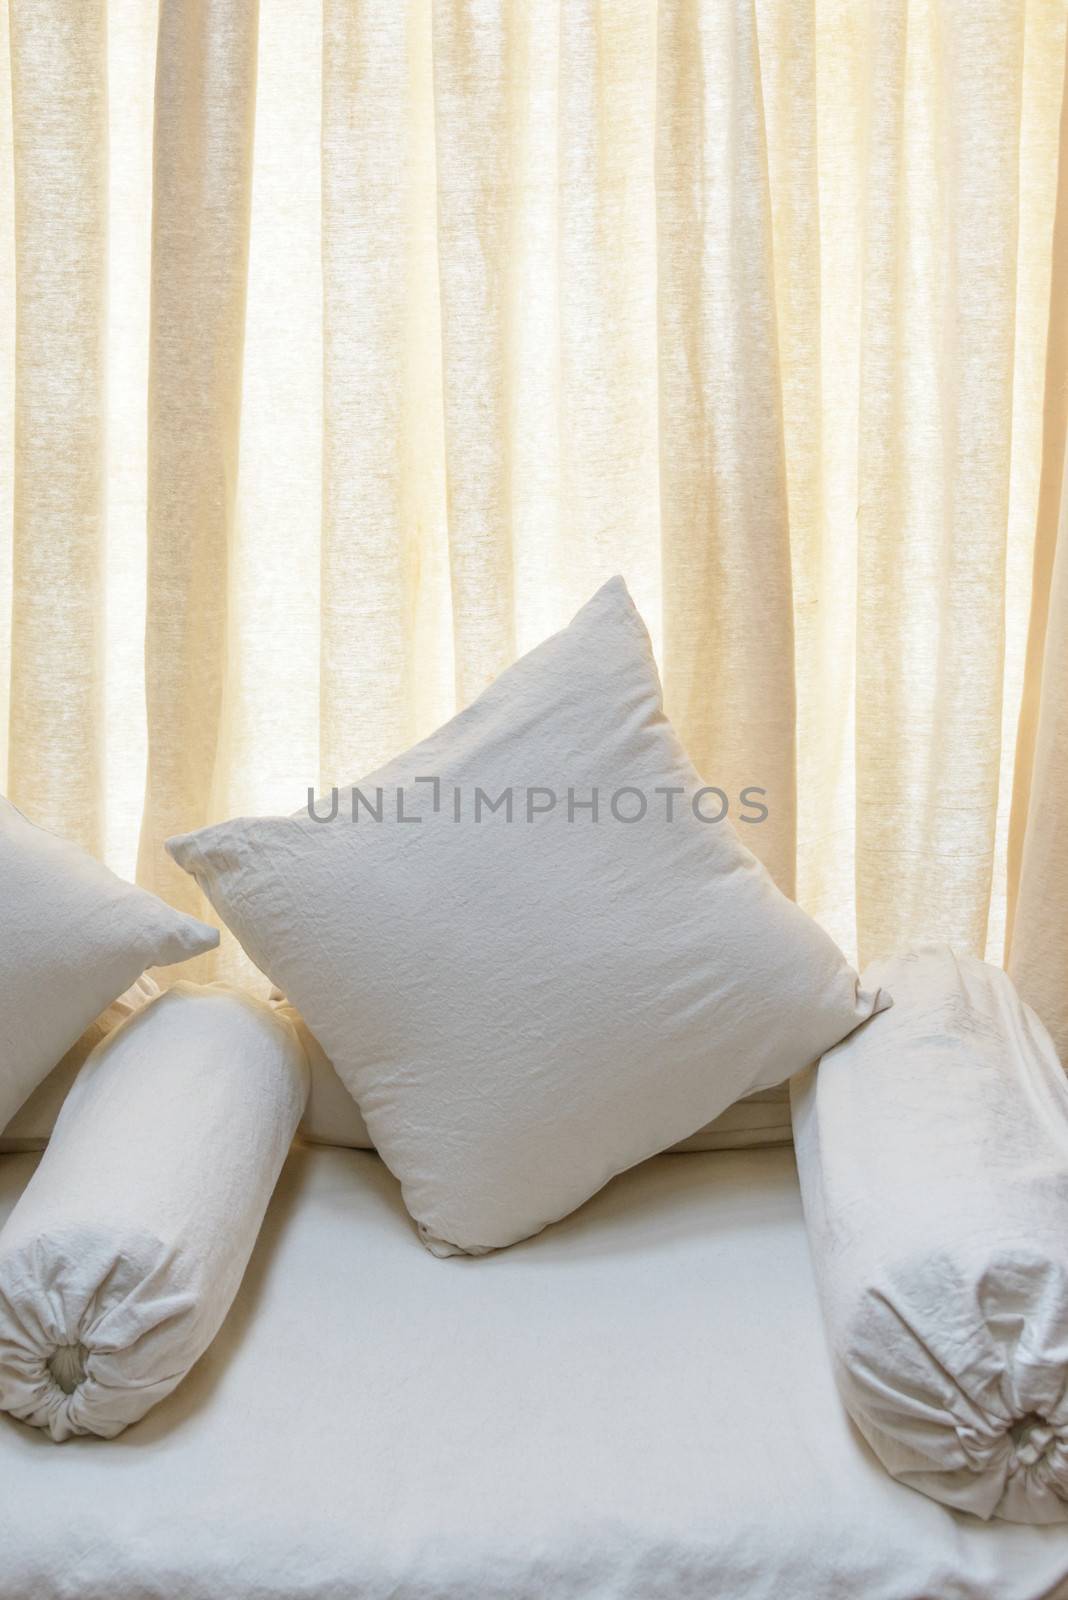 White sofa and cushions, backlit curtain background